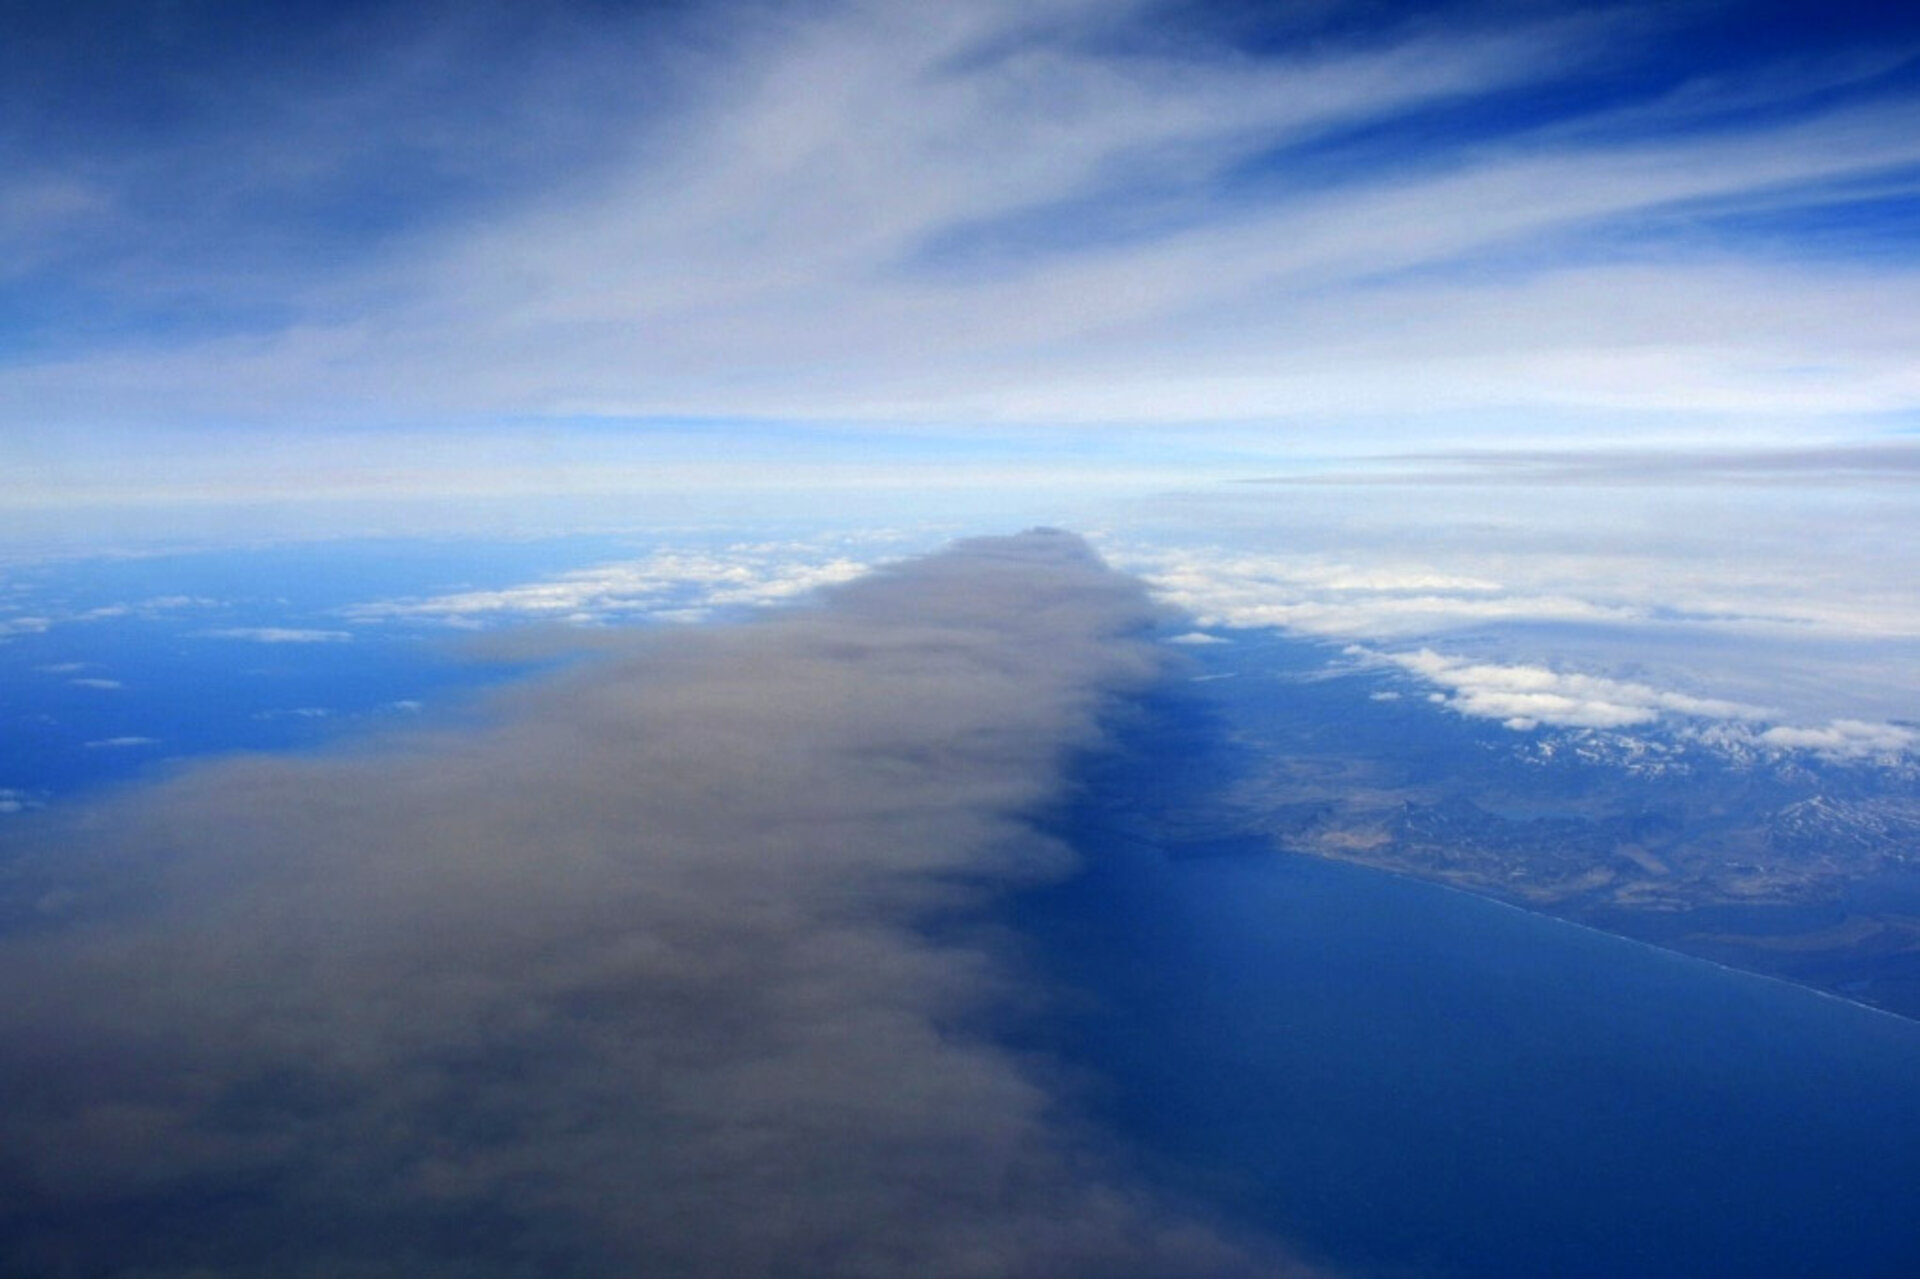 Volcano plume from Falcon aircraft